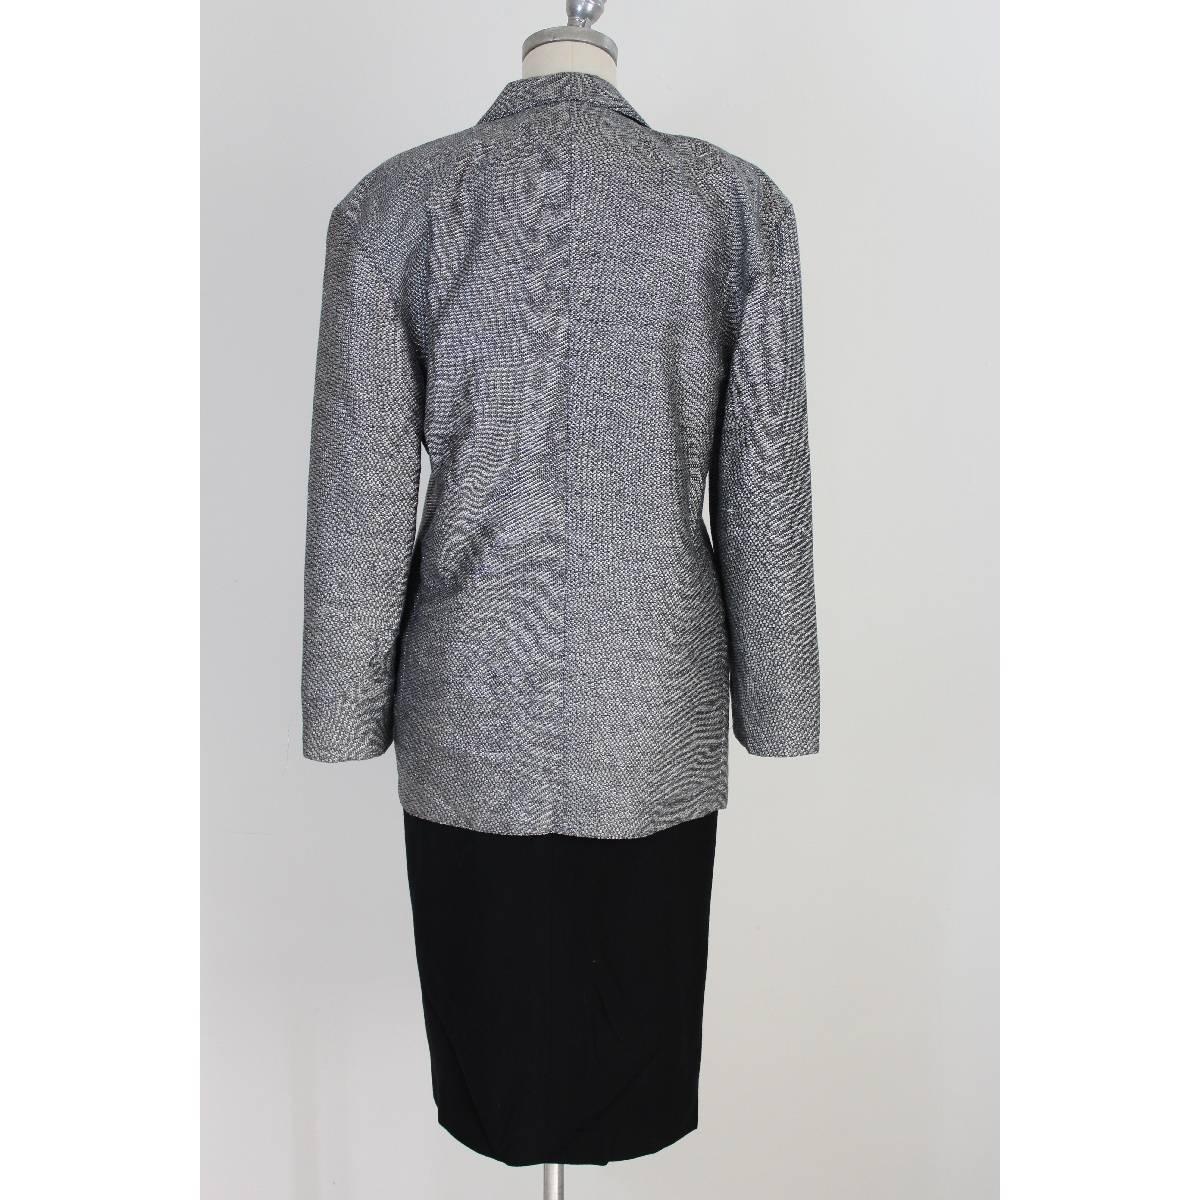 Escada vintage 1980s skirt suit women’s. Laminated jacket gray in linen and cotton and black skirt in wool. Size 36 made in Germany, new without tag.

Size 42 It 8 Us 10 Uk

Shoulders: 48 cm
Chest / Bust: 50 cm
Sleeves: 58 cm
Length: 82 cm

Skirt